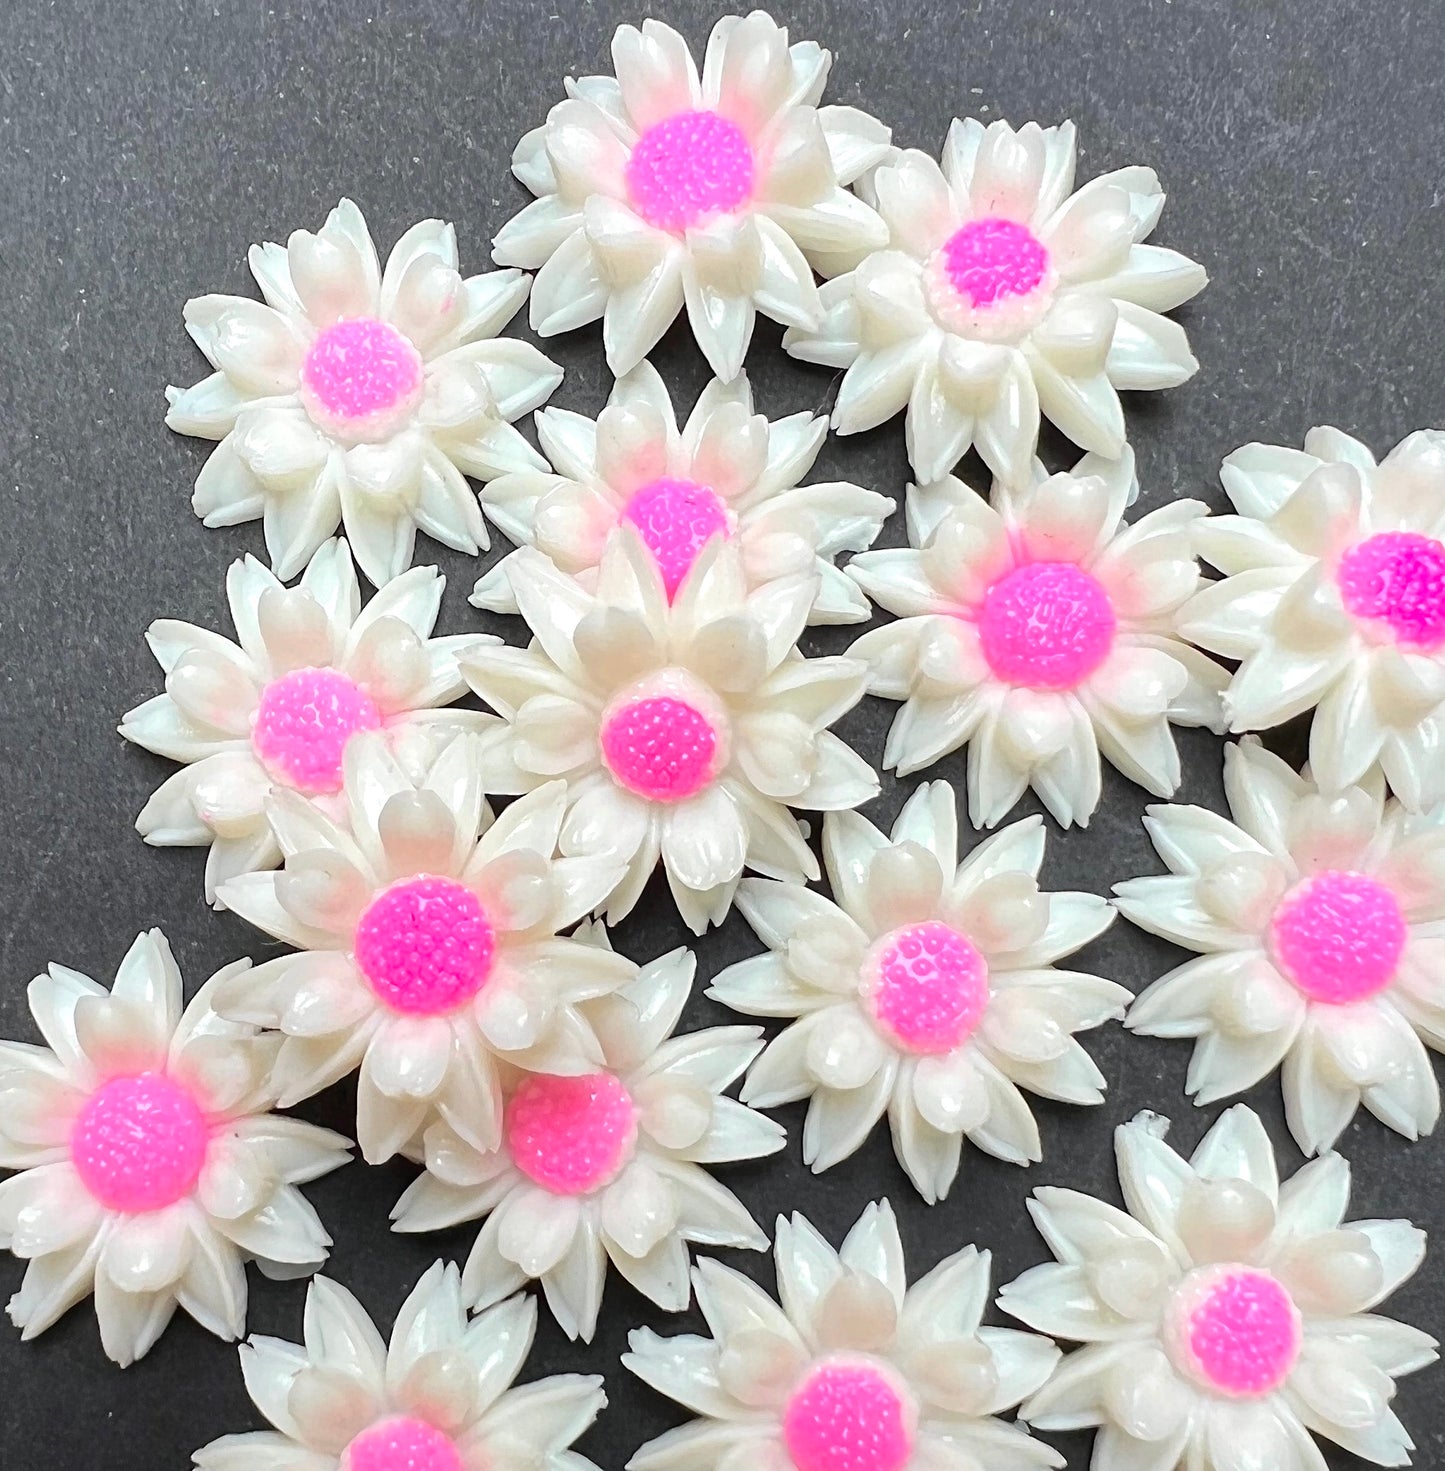 Pretty Vintage Hand Painted Made in Japan  Flower Cabochons - 1cm - 2cm